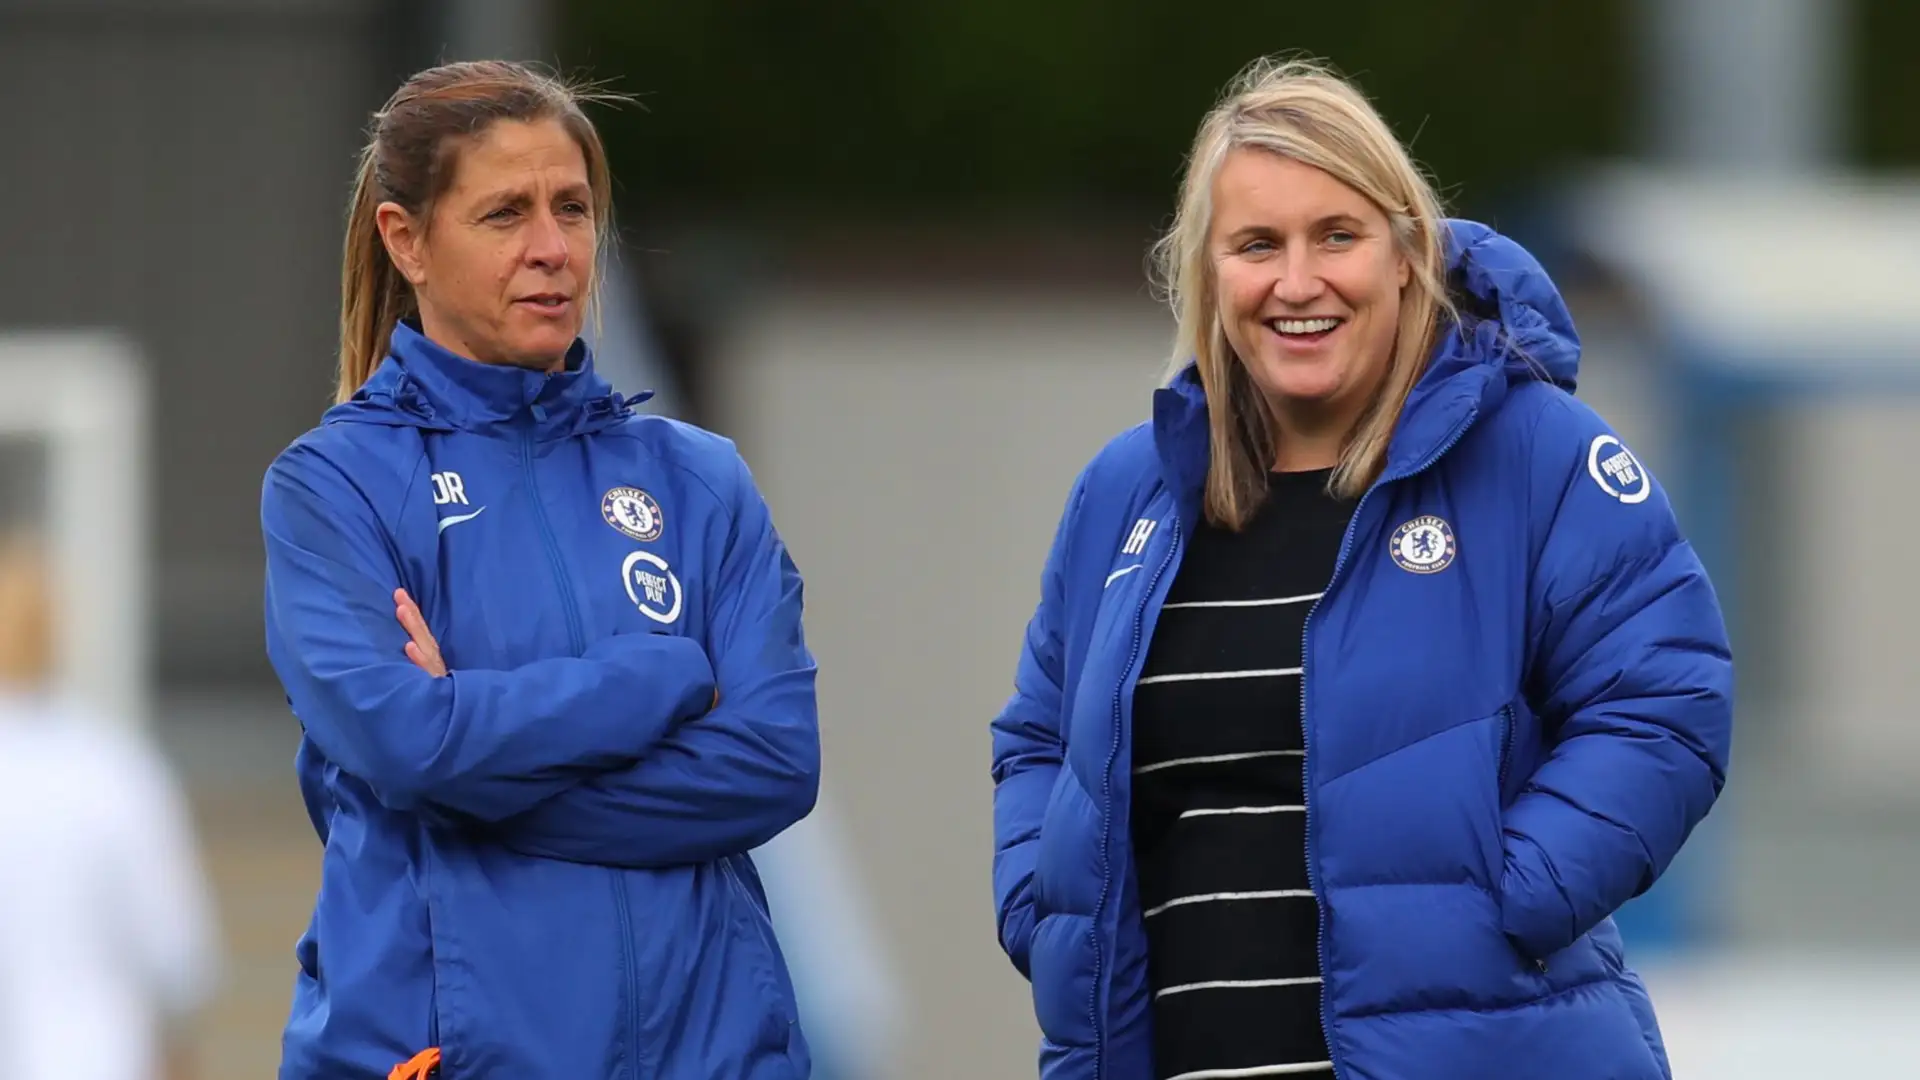 Along for the ride! Emma Hayes joined at USWNT by FIVE Chelsea staff members with Olympic preparations set to continue in South Korea double header